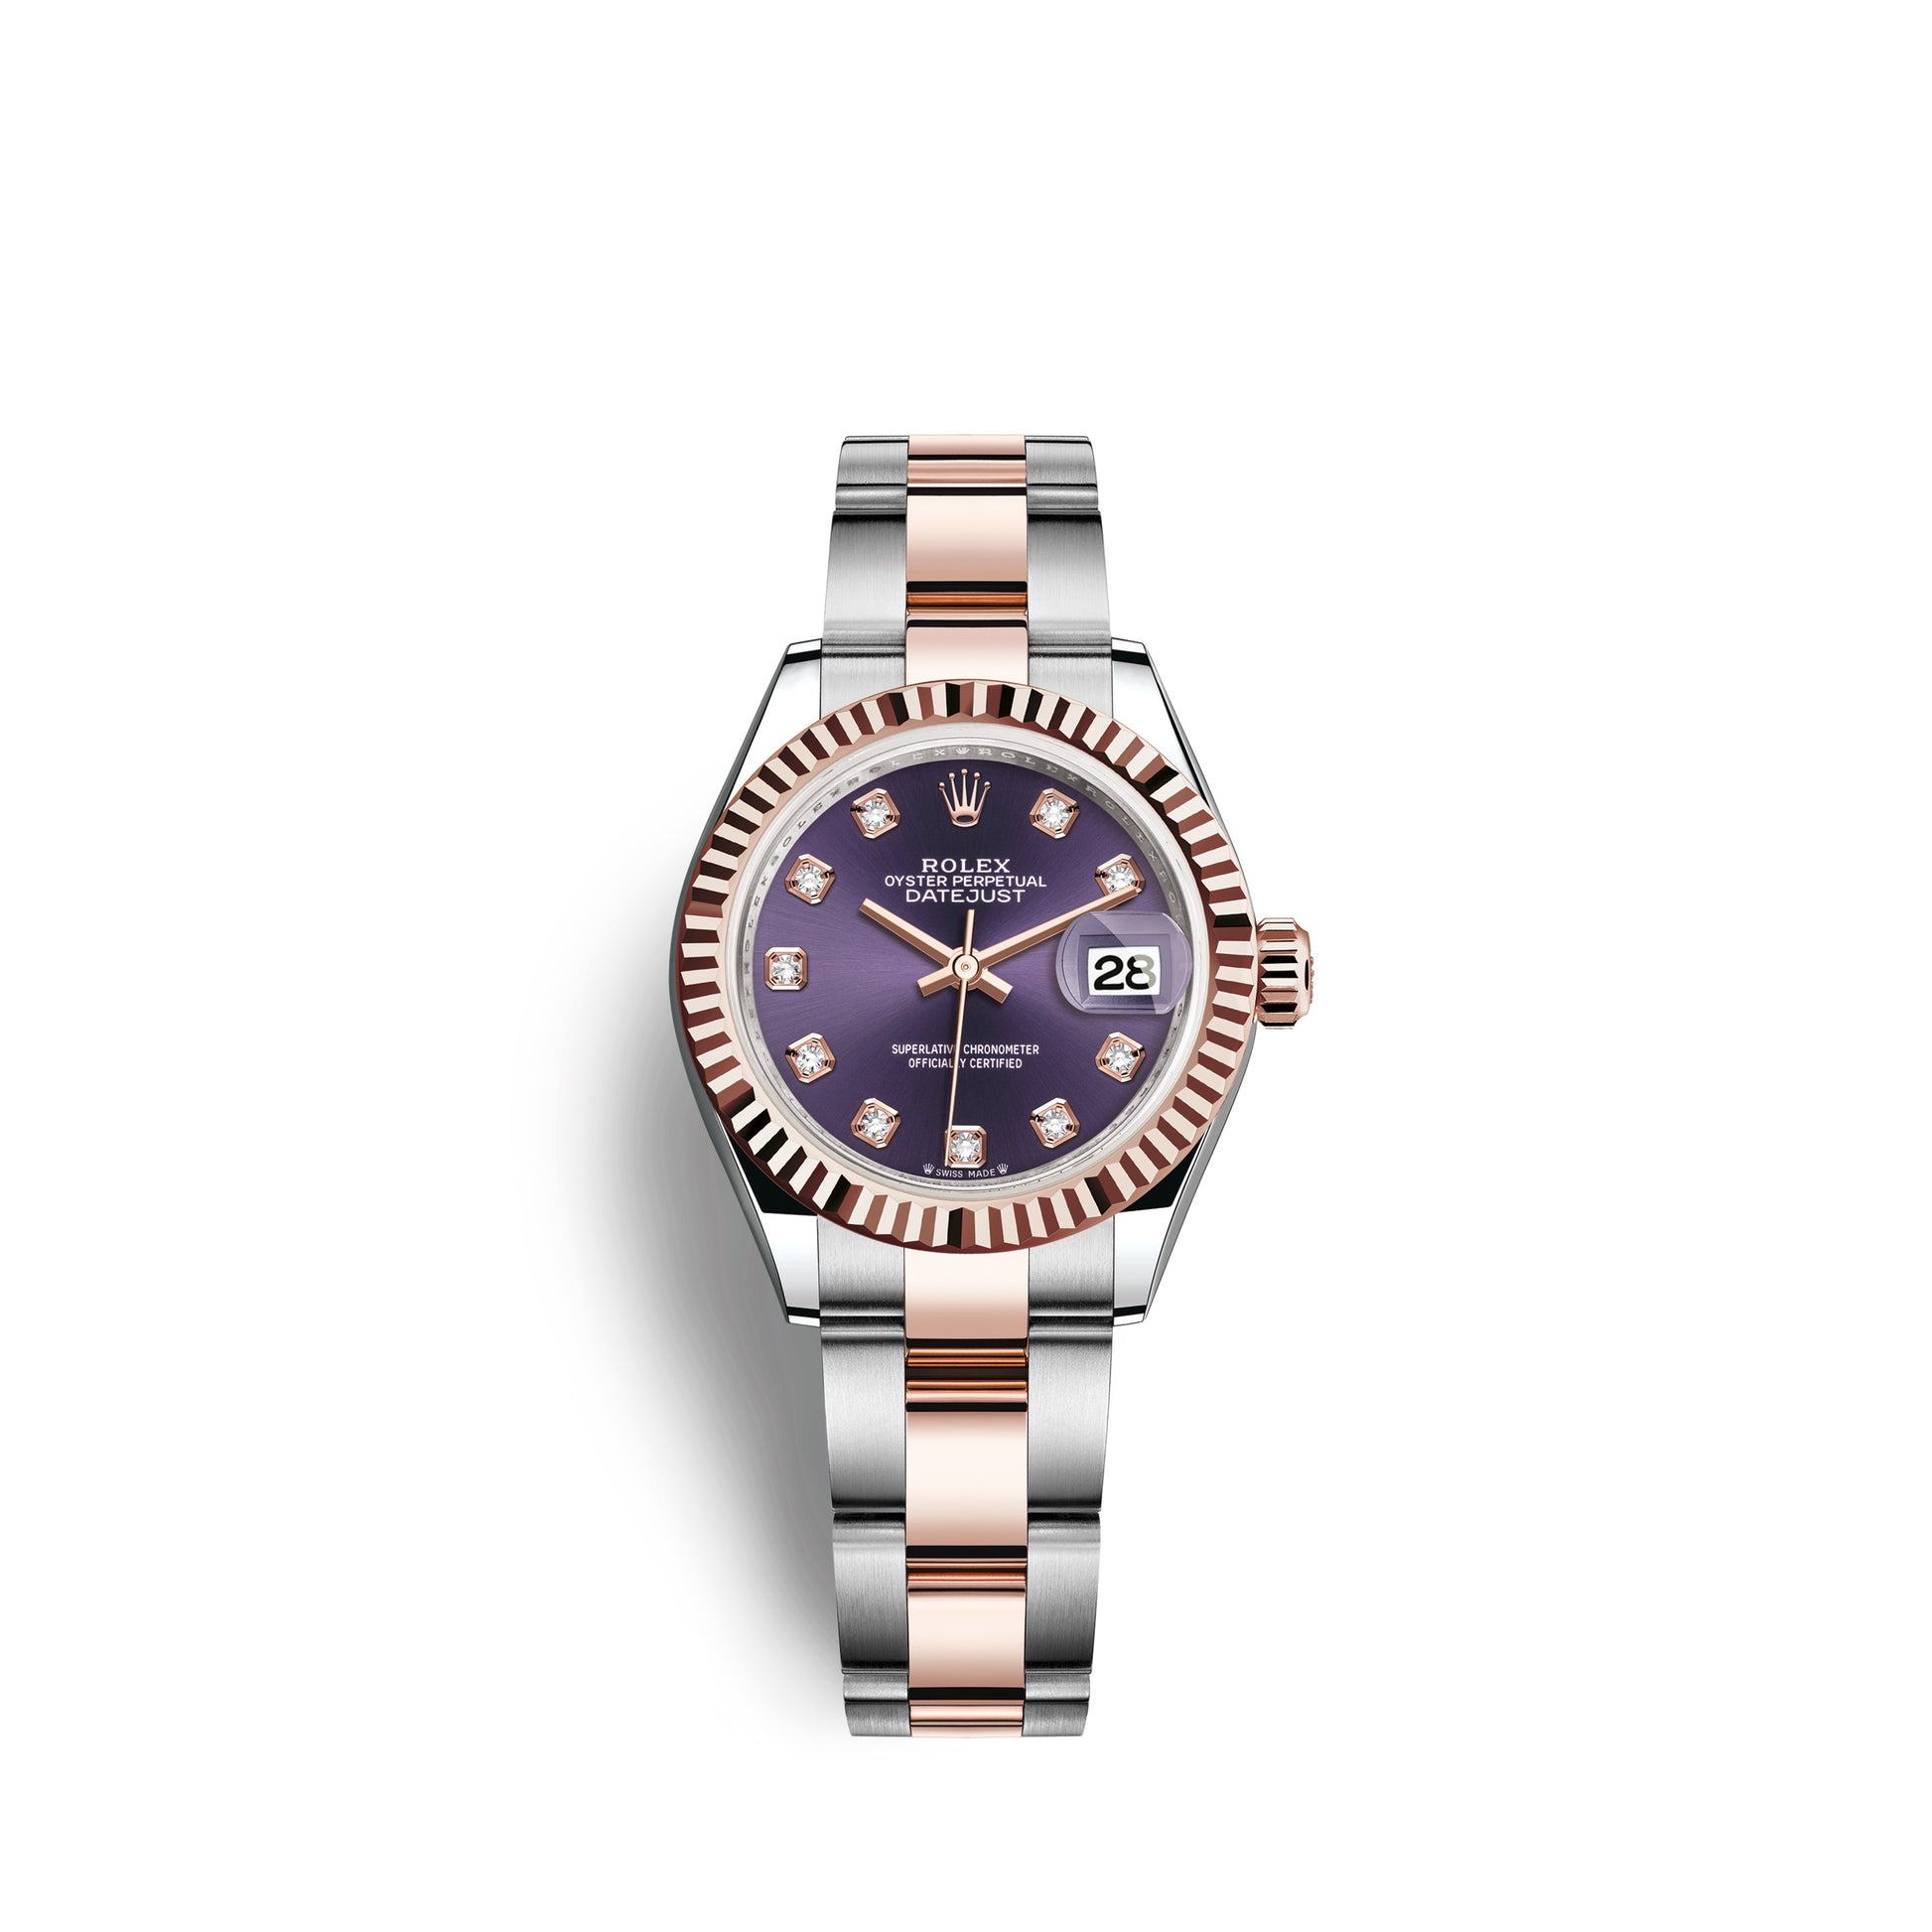 Rolex Lady-Datejust 28, Oystersteel and 18k Everose Gold, Ref# 279171-0016